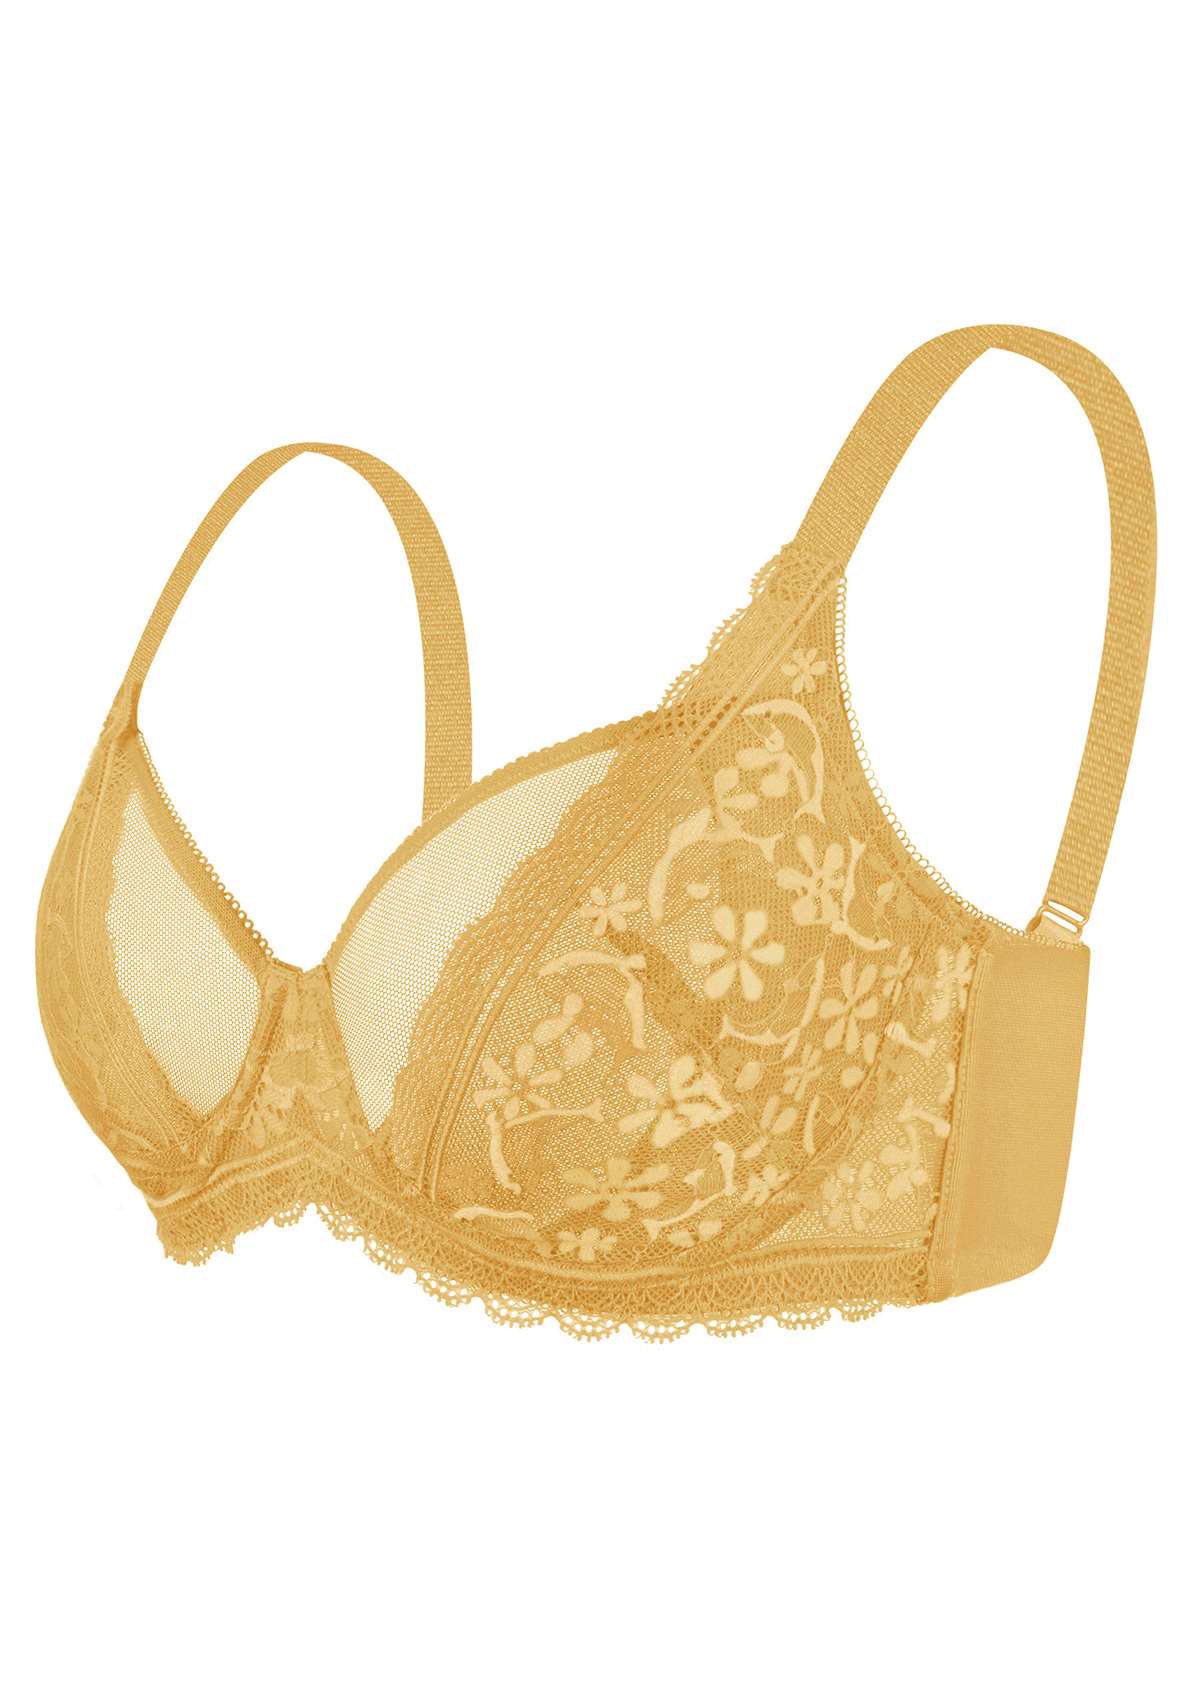 HSIA Anemone Lace Unlined Bra: Supportive, Lightweight Bra - Ginger / 38 / D